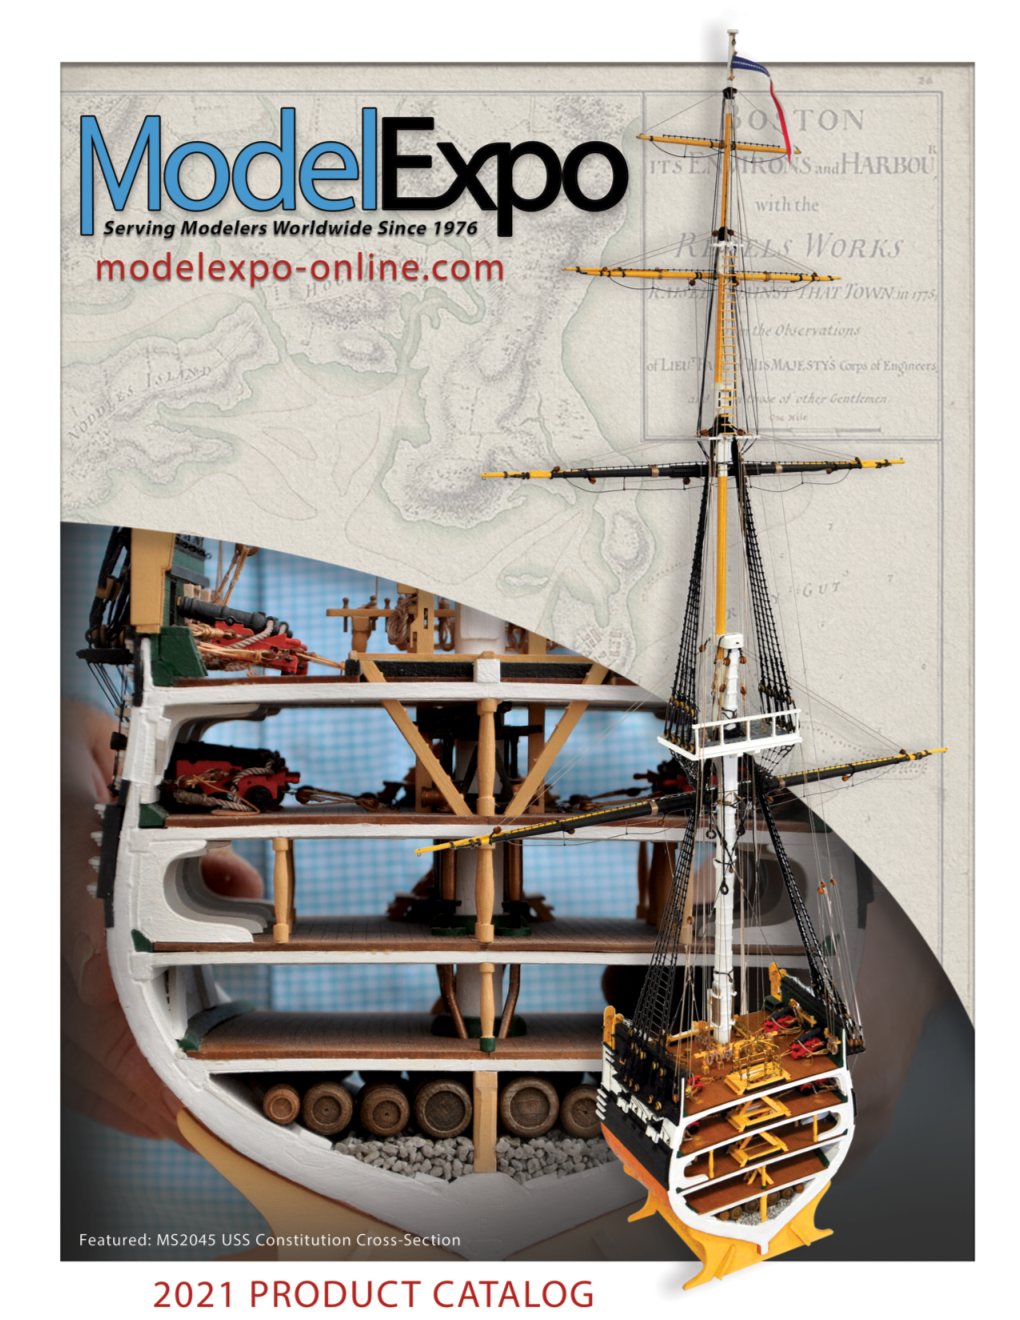 NEW to SHIP MODELING? Become a Shipwright of Old